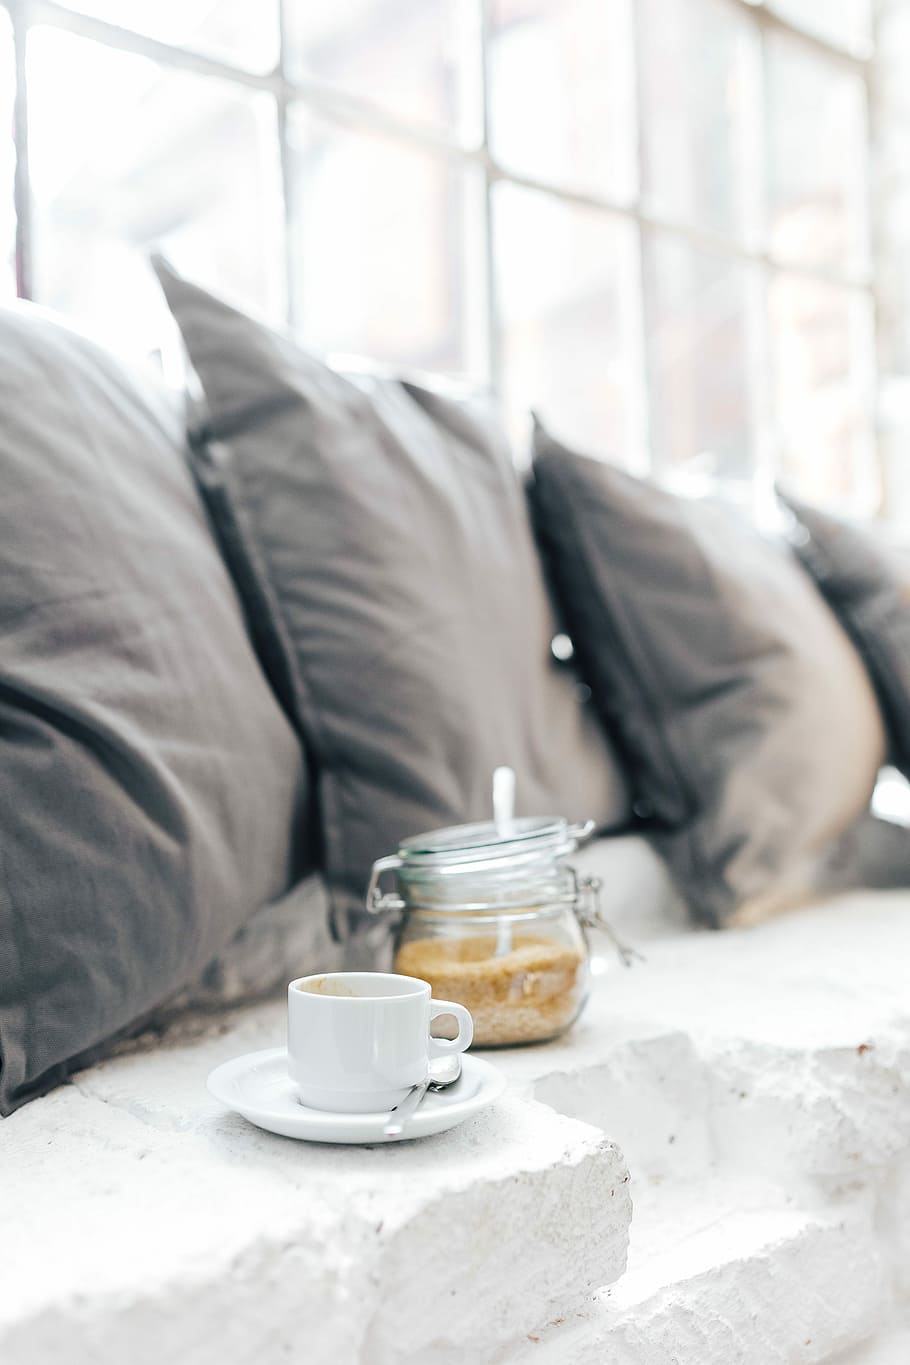 Morning coffee with a jar of brown sugar, spices, breakfast, pillows